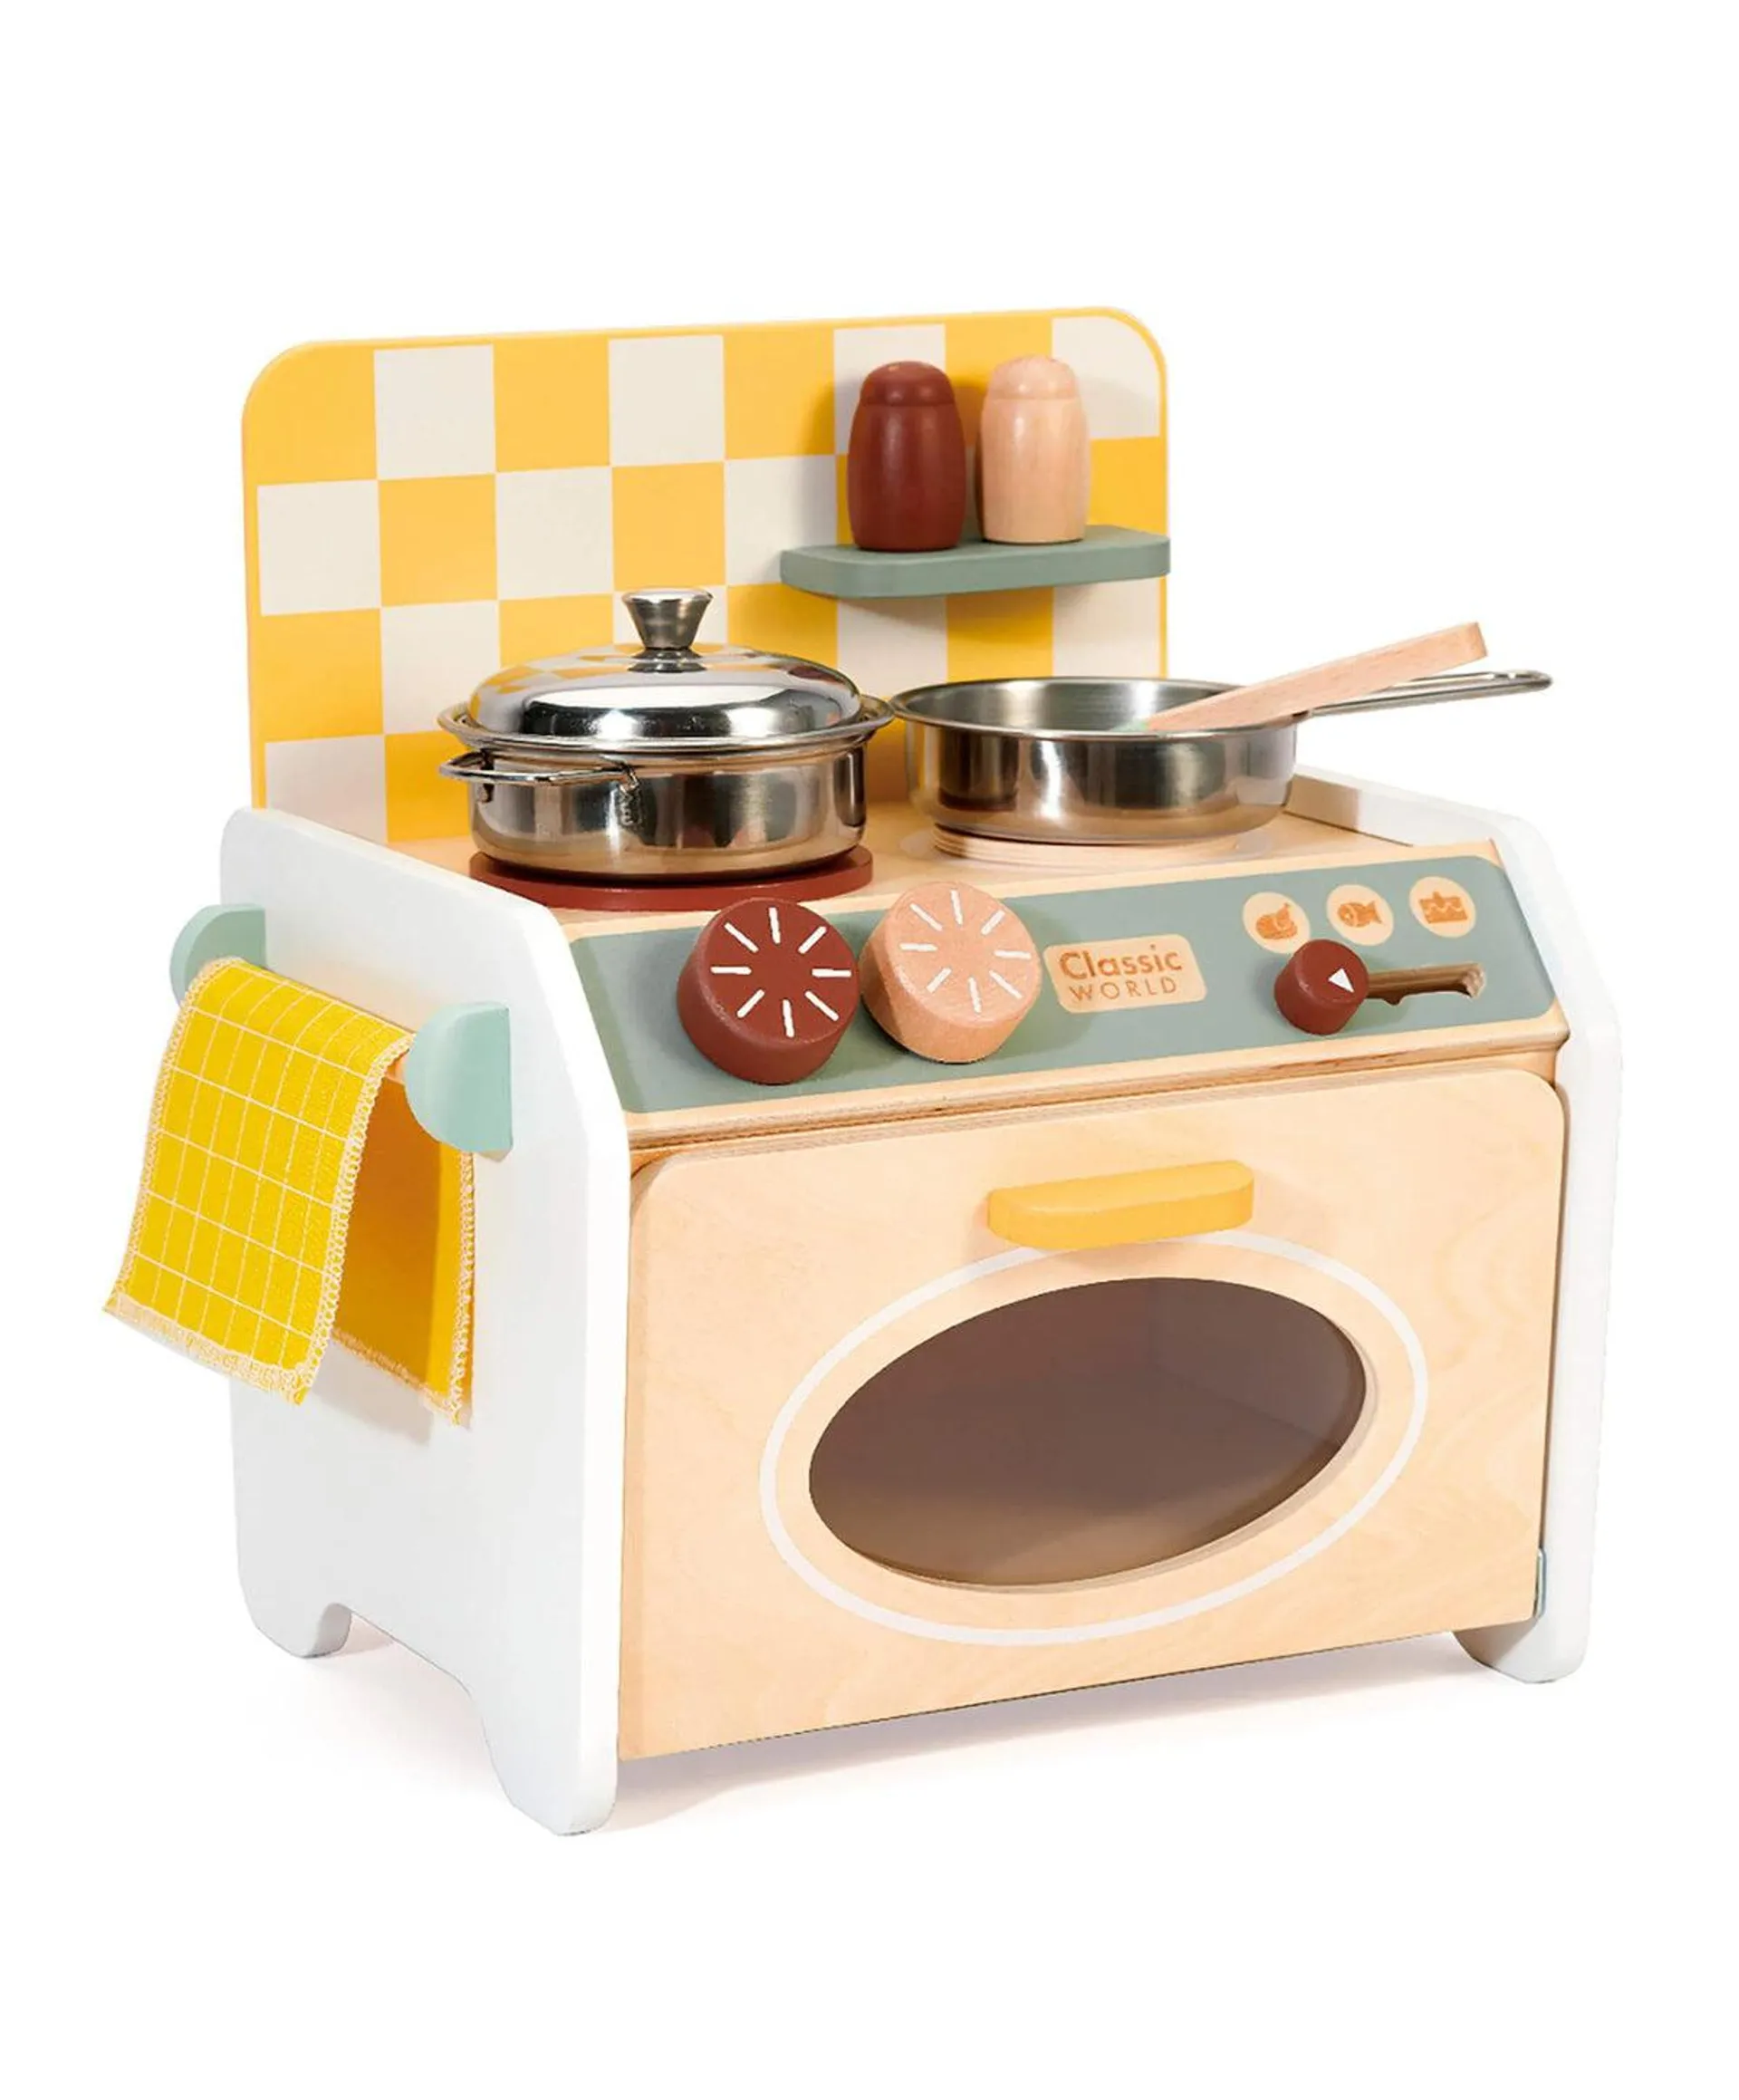 Classic World Small Wooden Play Kitchen Toy